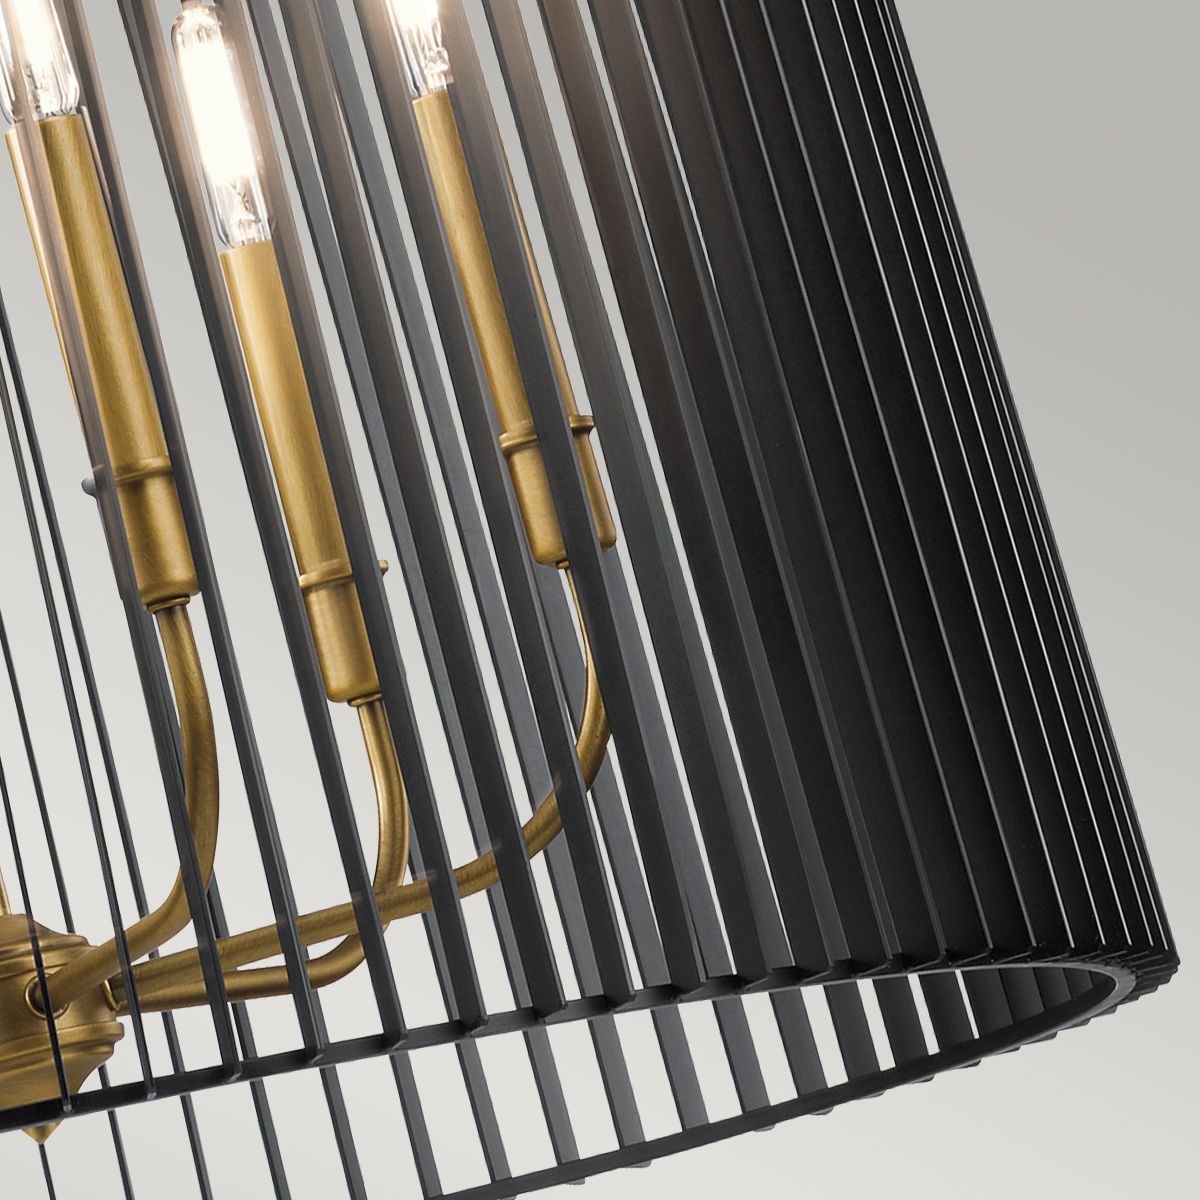 6 Light Chandelier In Natural Brass With Black Slatted Shade